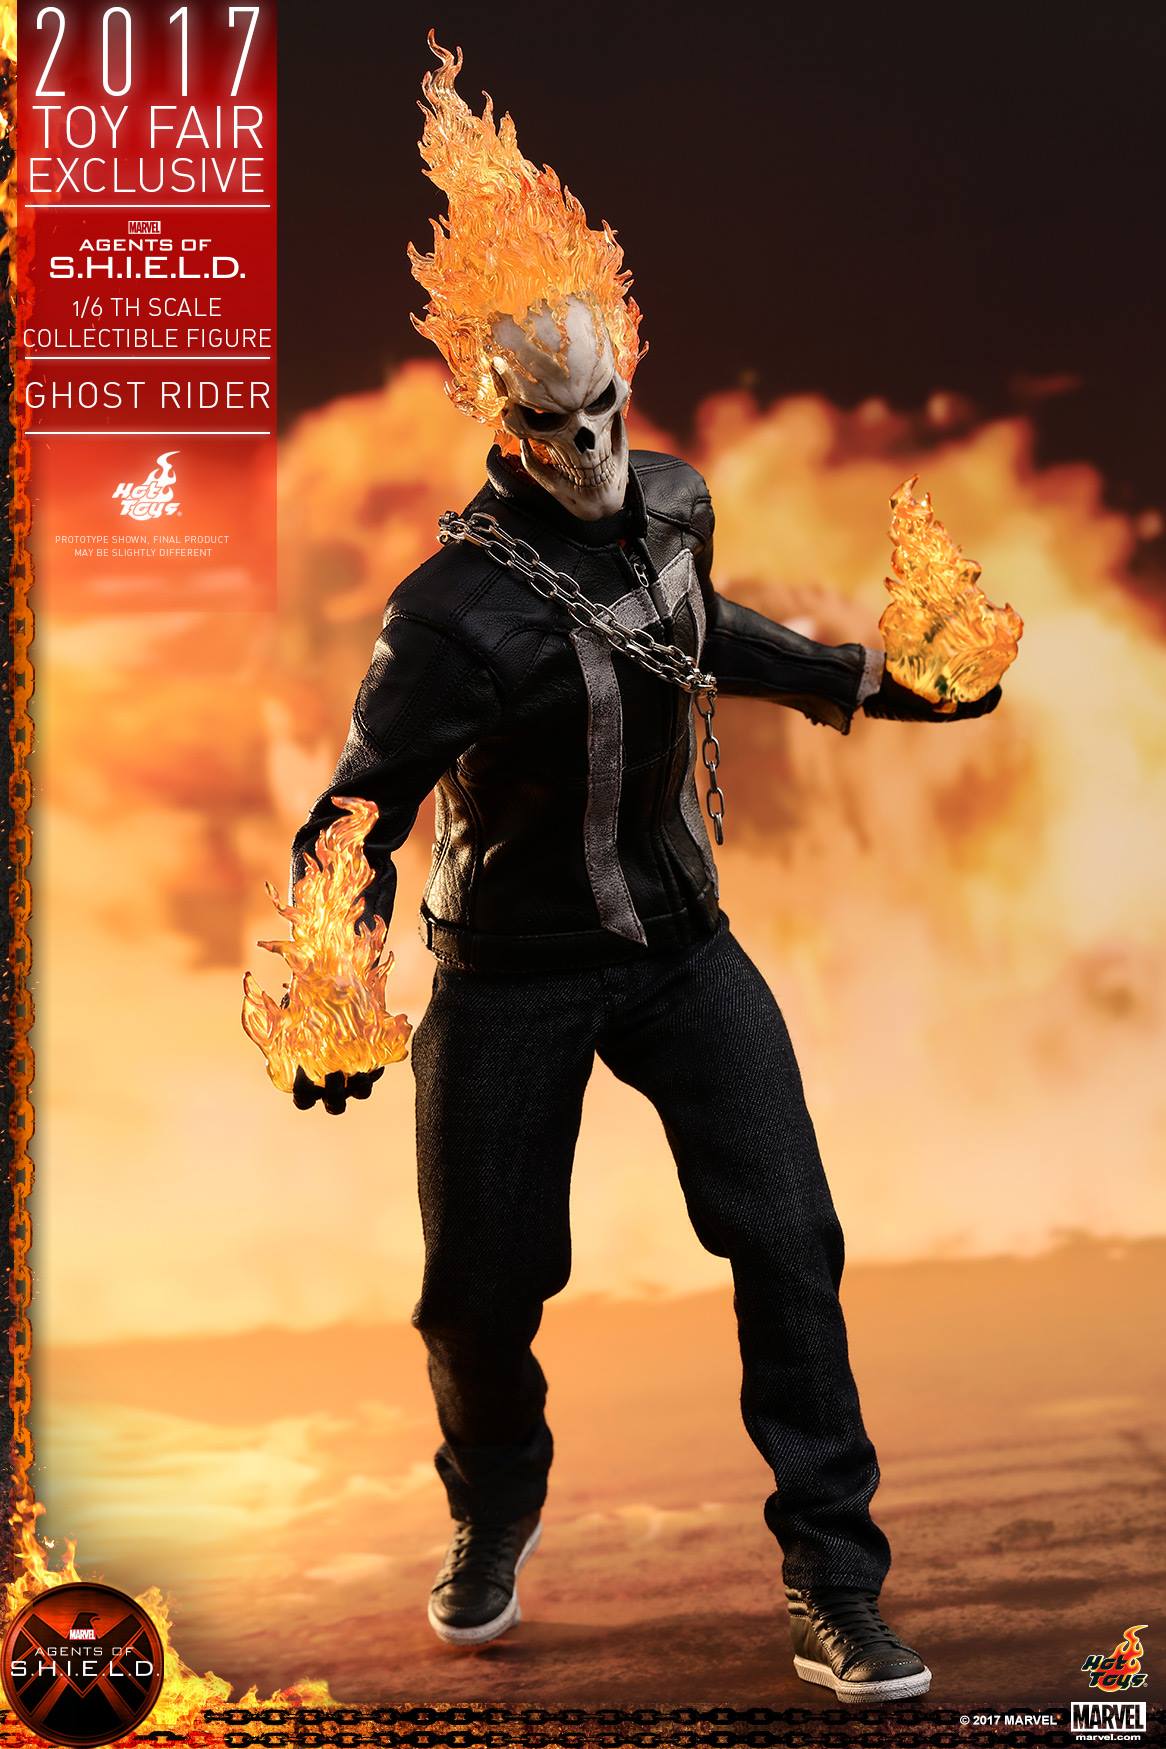 Agents of SHIELD -1/6th scale Ghost Rider Collectible Figure